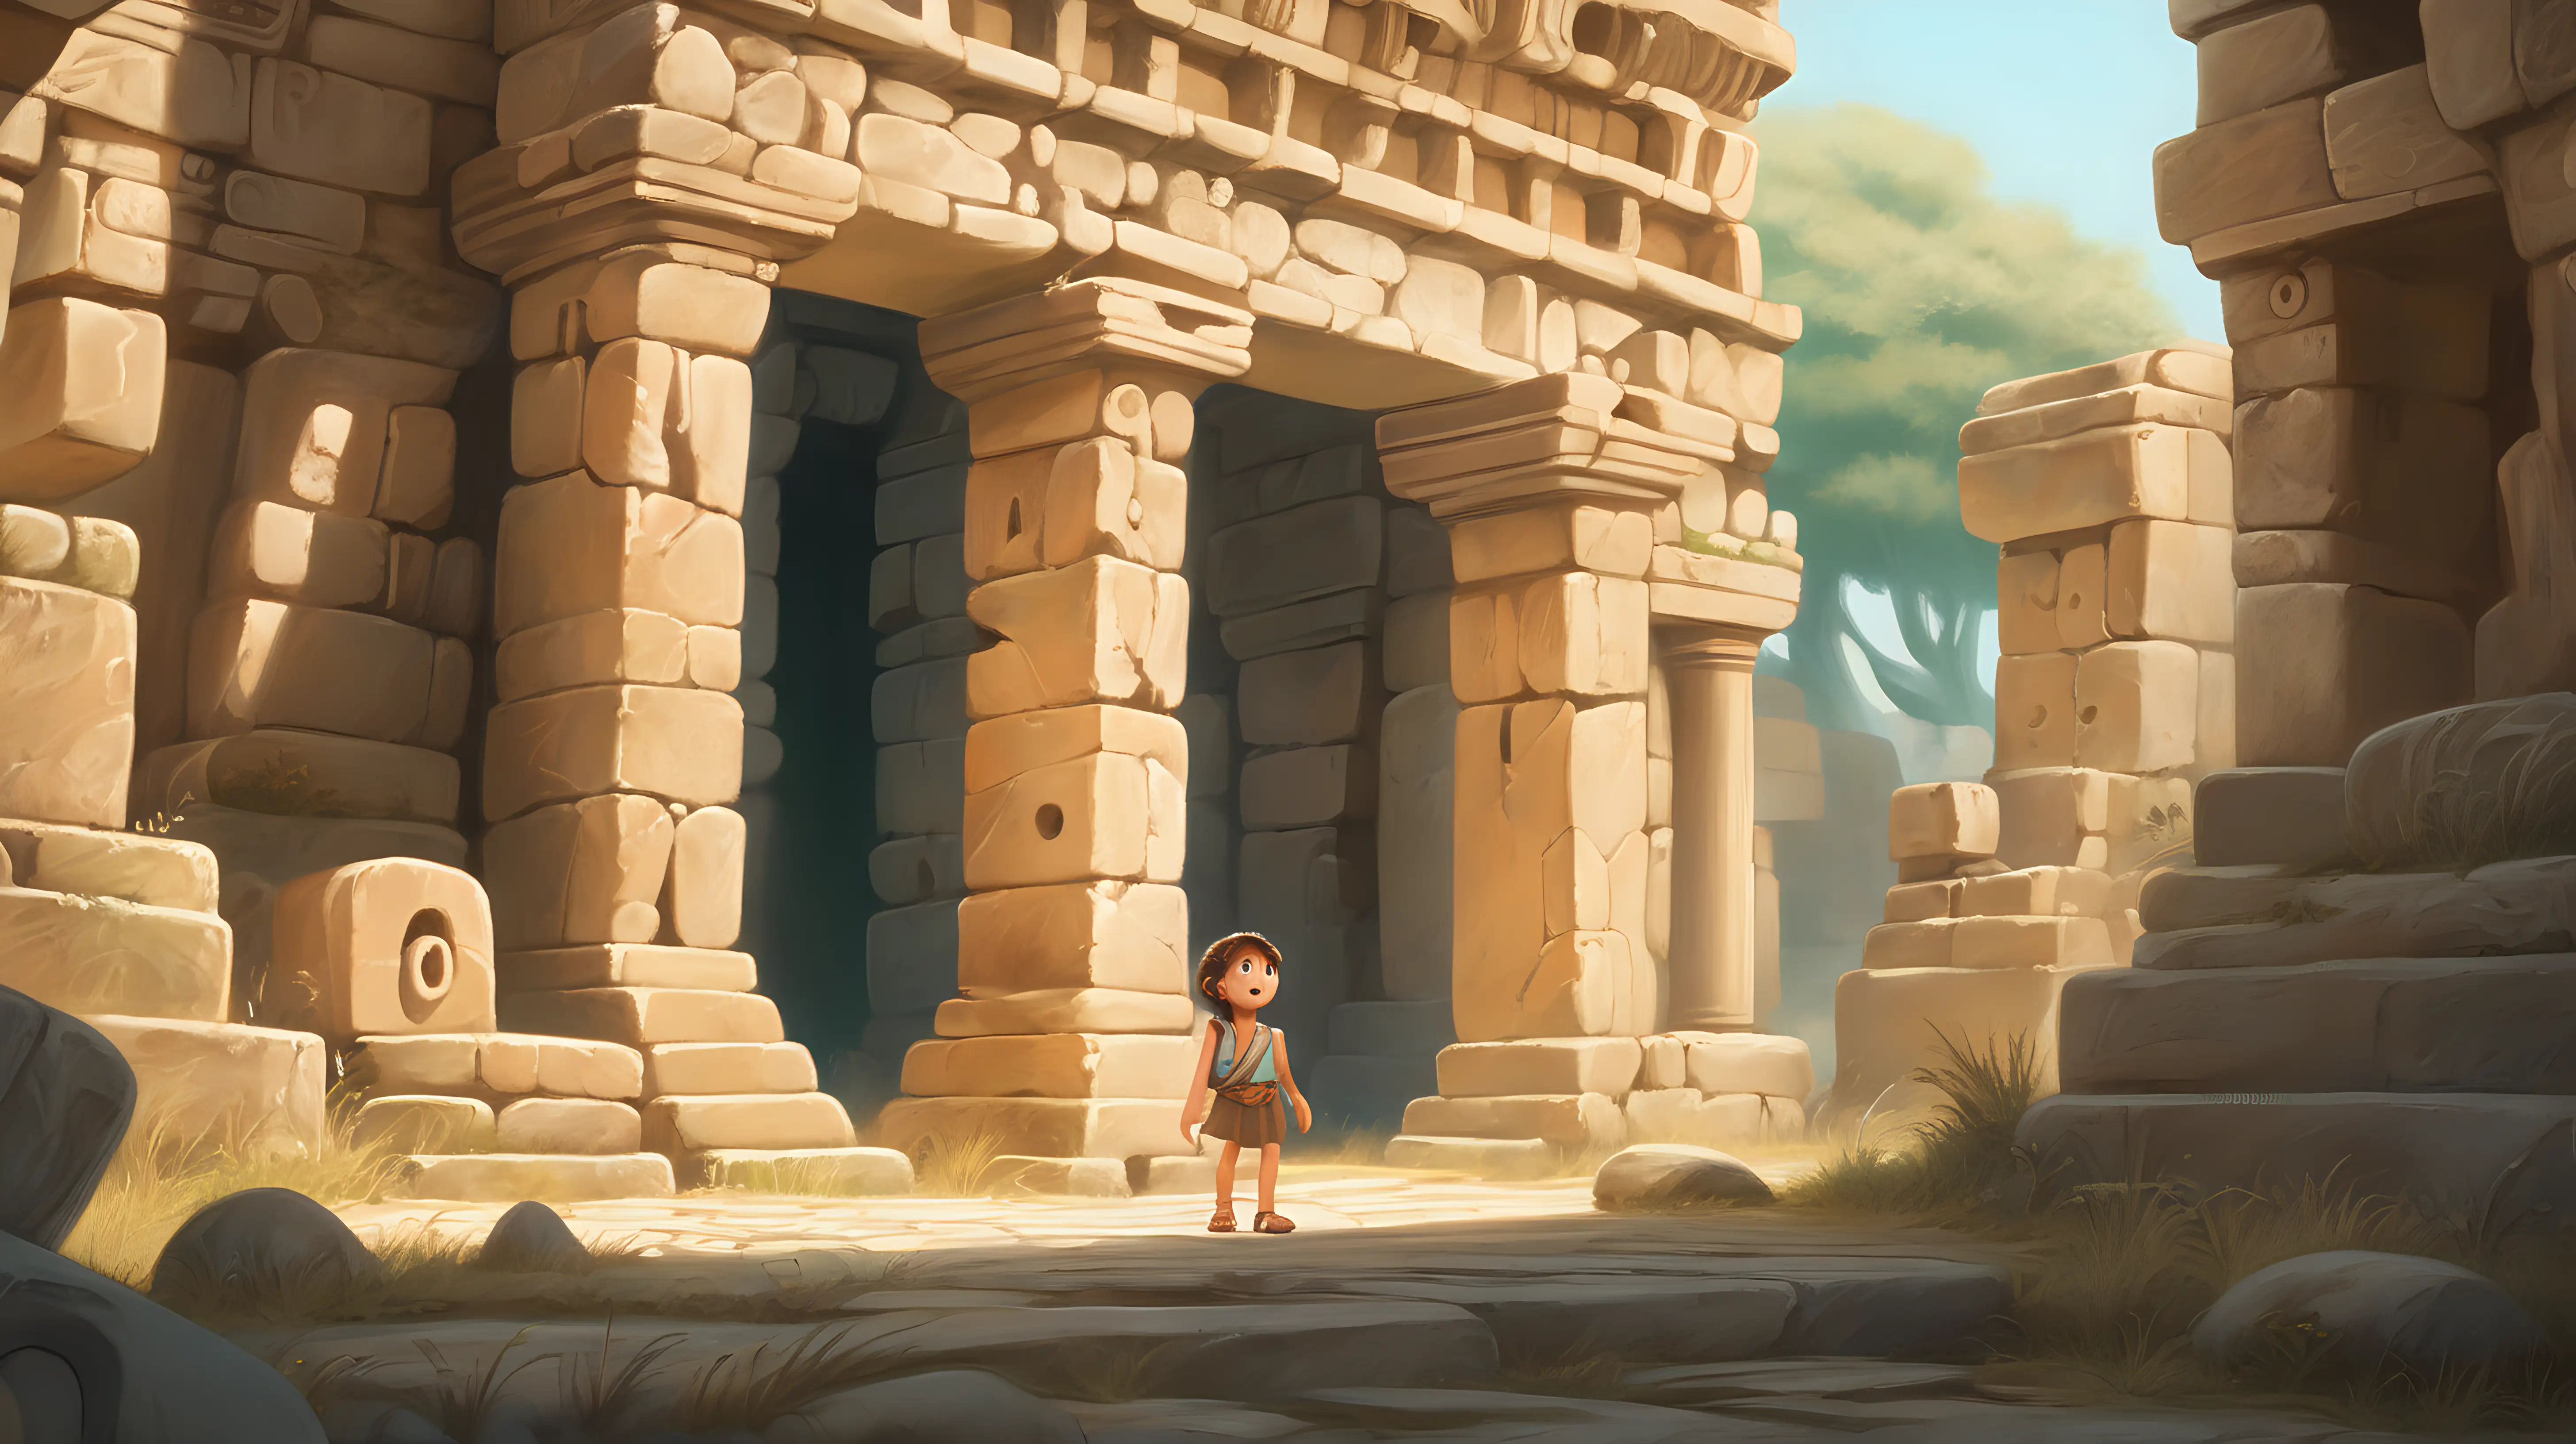 A lovable, small character with a playful demeanor, engaging in a game of hide-and-seek among ancient ruins.